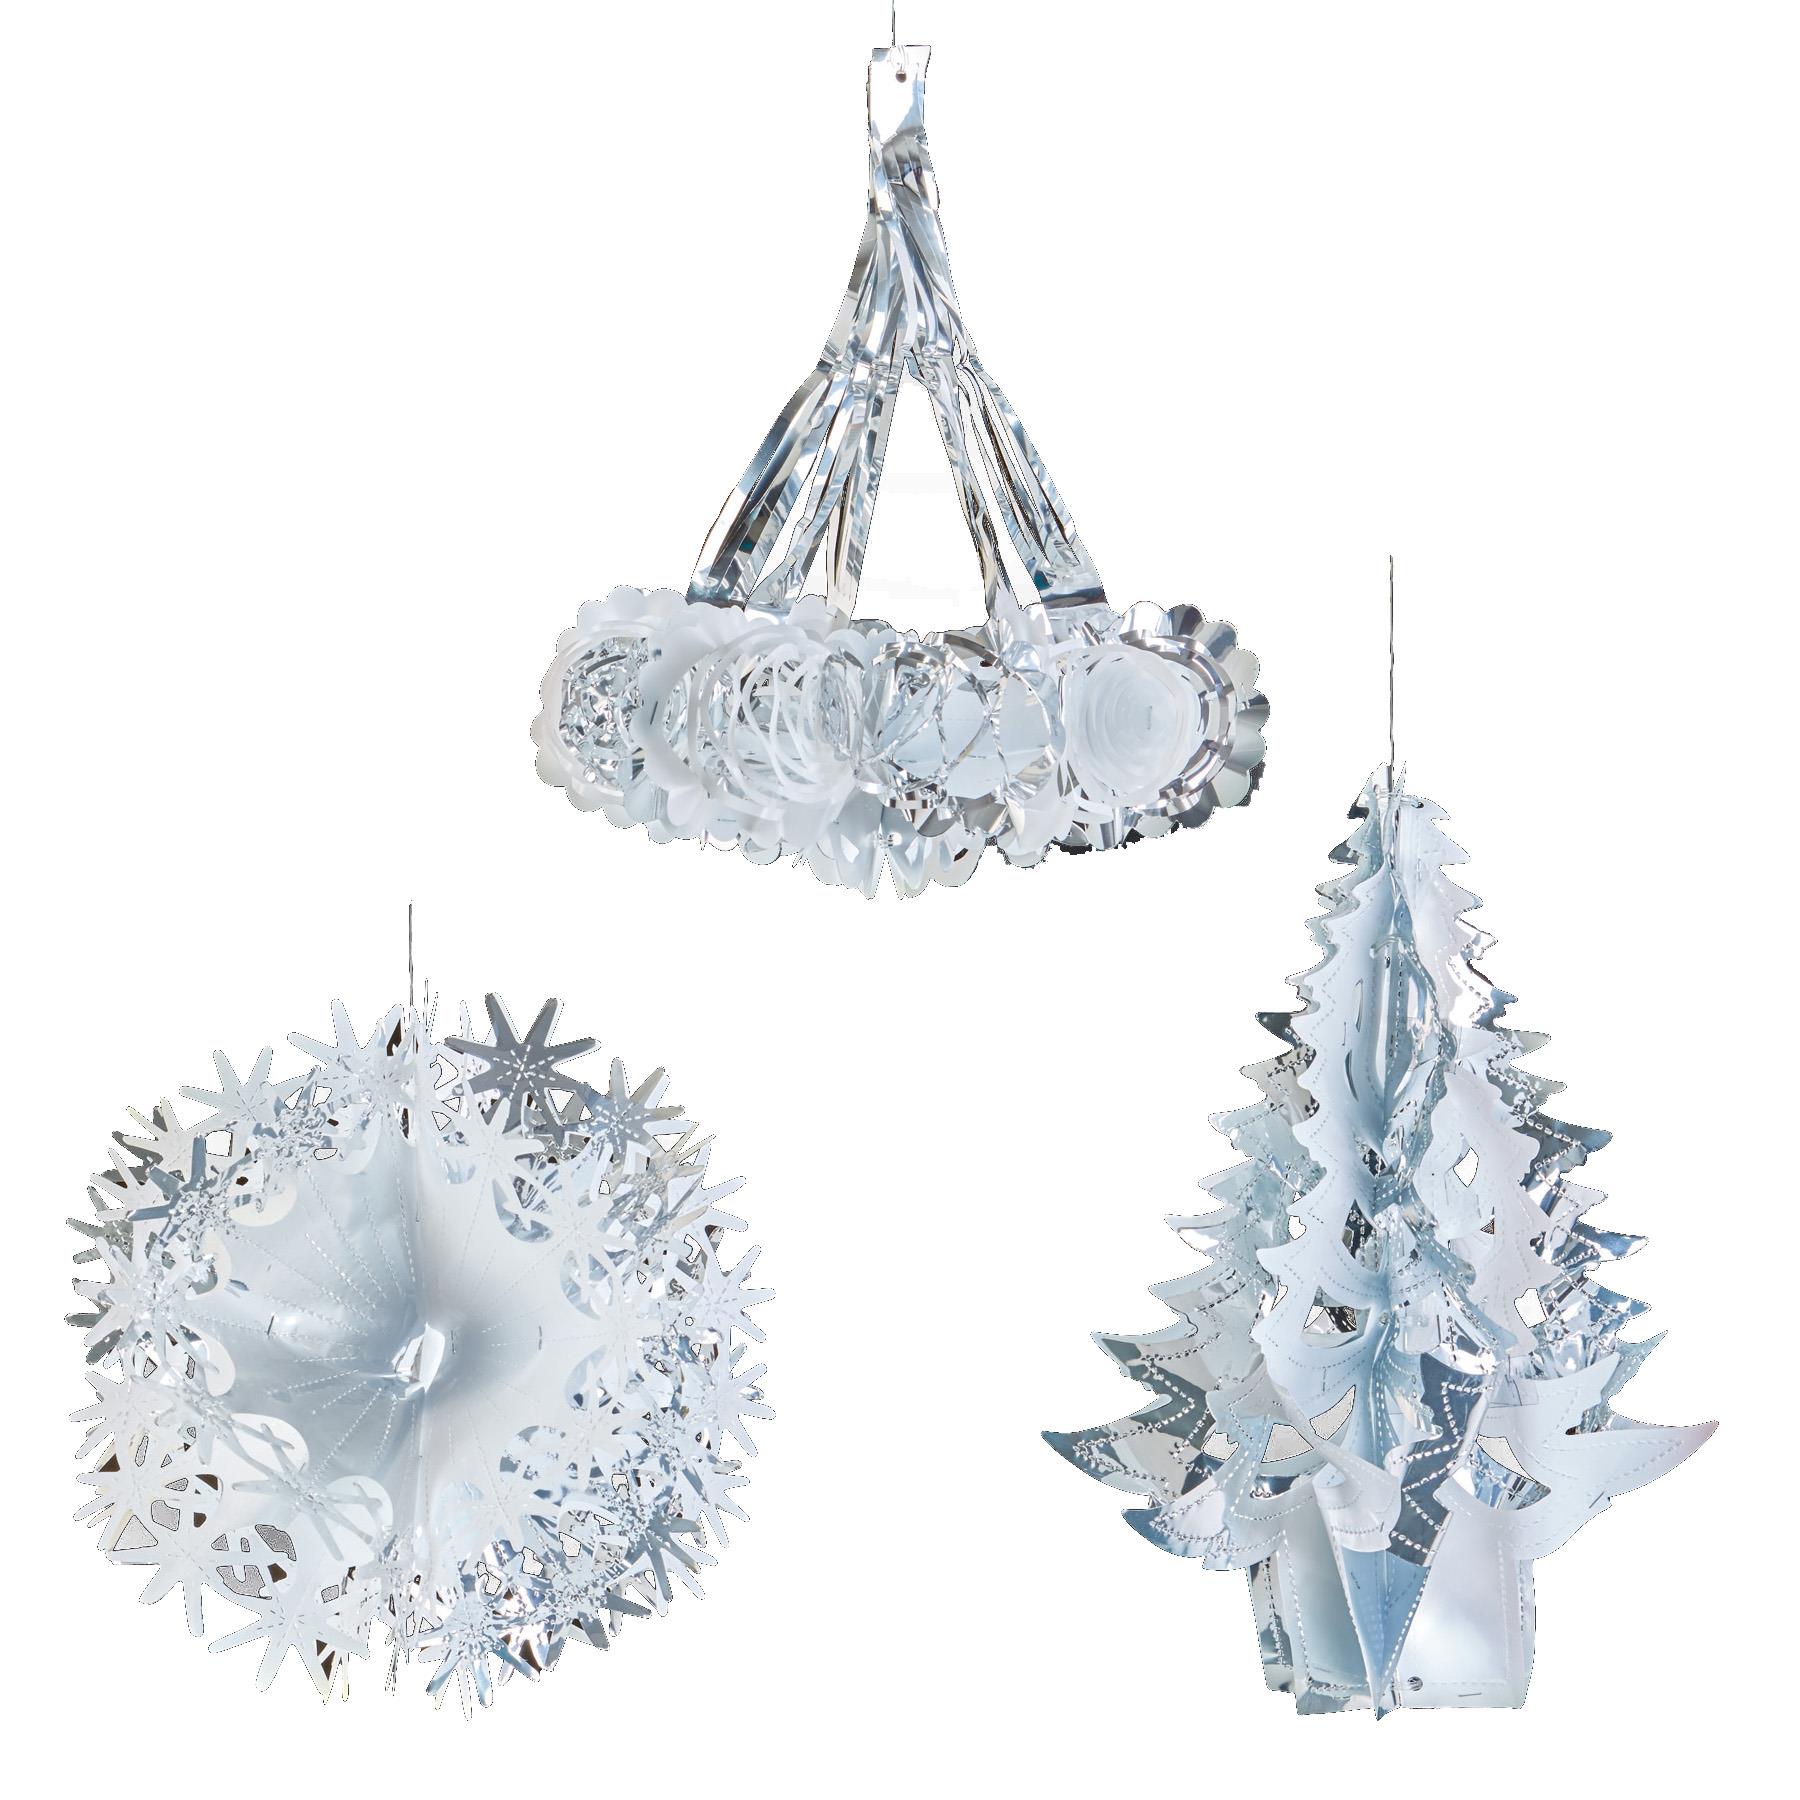 Silver / White Christmas 2 Tone Foil Ceiling Decorations - Tree Ball Chandelier Set